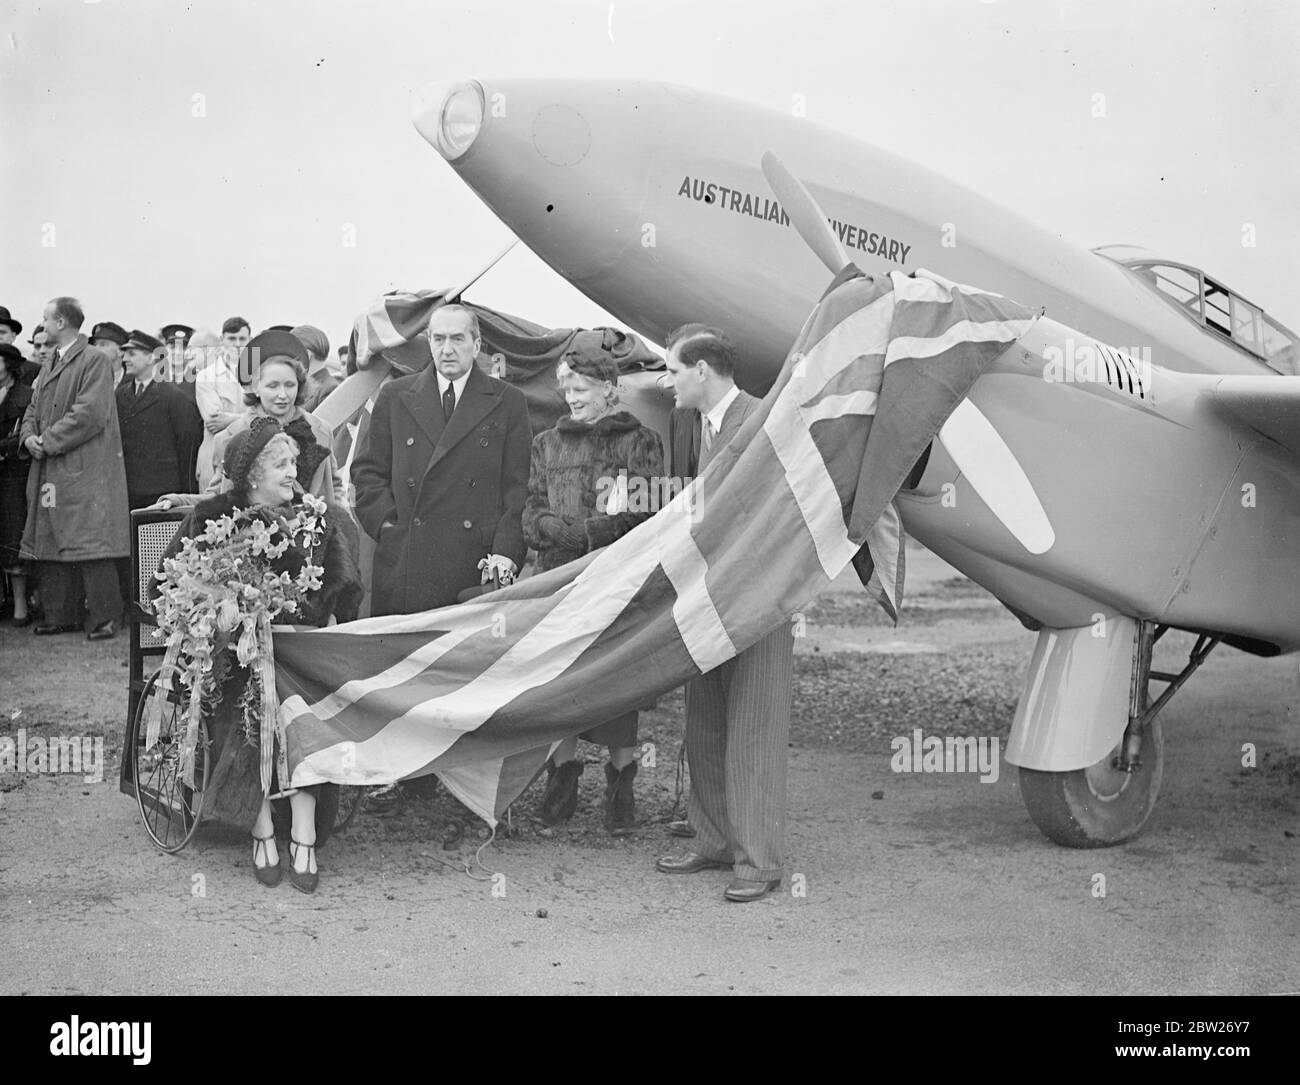 Clouston's ready for New Zealand record attempt, playing christened at Croydon by Lady Weigall from Bath Chair at Croydon. The 220 mile an hour Comet Plane in which flying Ofc, A E. Clouston is to make his New Zealand and back record attempt, was christened at Croydon aerodrome by Lady Weigall, who named it 'Australian Anniversary'. Mr SM Bruce, the Australian High Commissioner, was present at the ceremony. Clouston hopes to accomplish the record journey in nine days. The flight is to start next Monday. Photo shows, the scene at the christening, Lady Weigall in her bath chair. 3 February 1938 Stock Photo